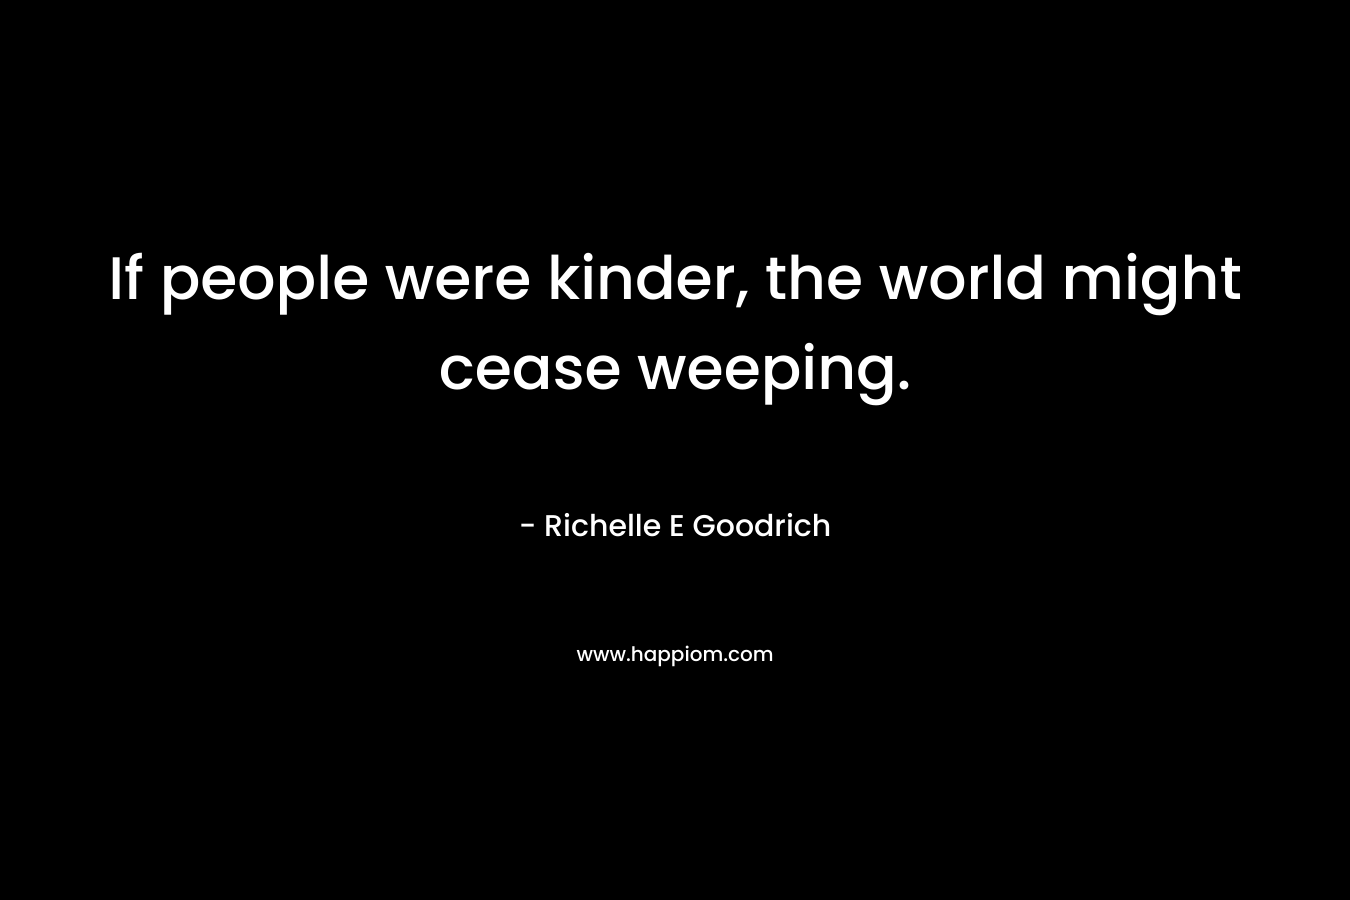 If people were kinder, the world might cease weeping.